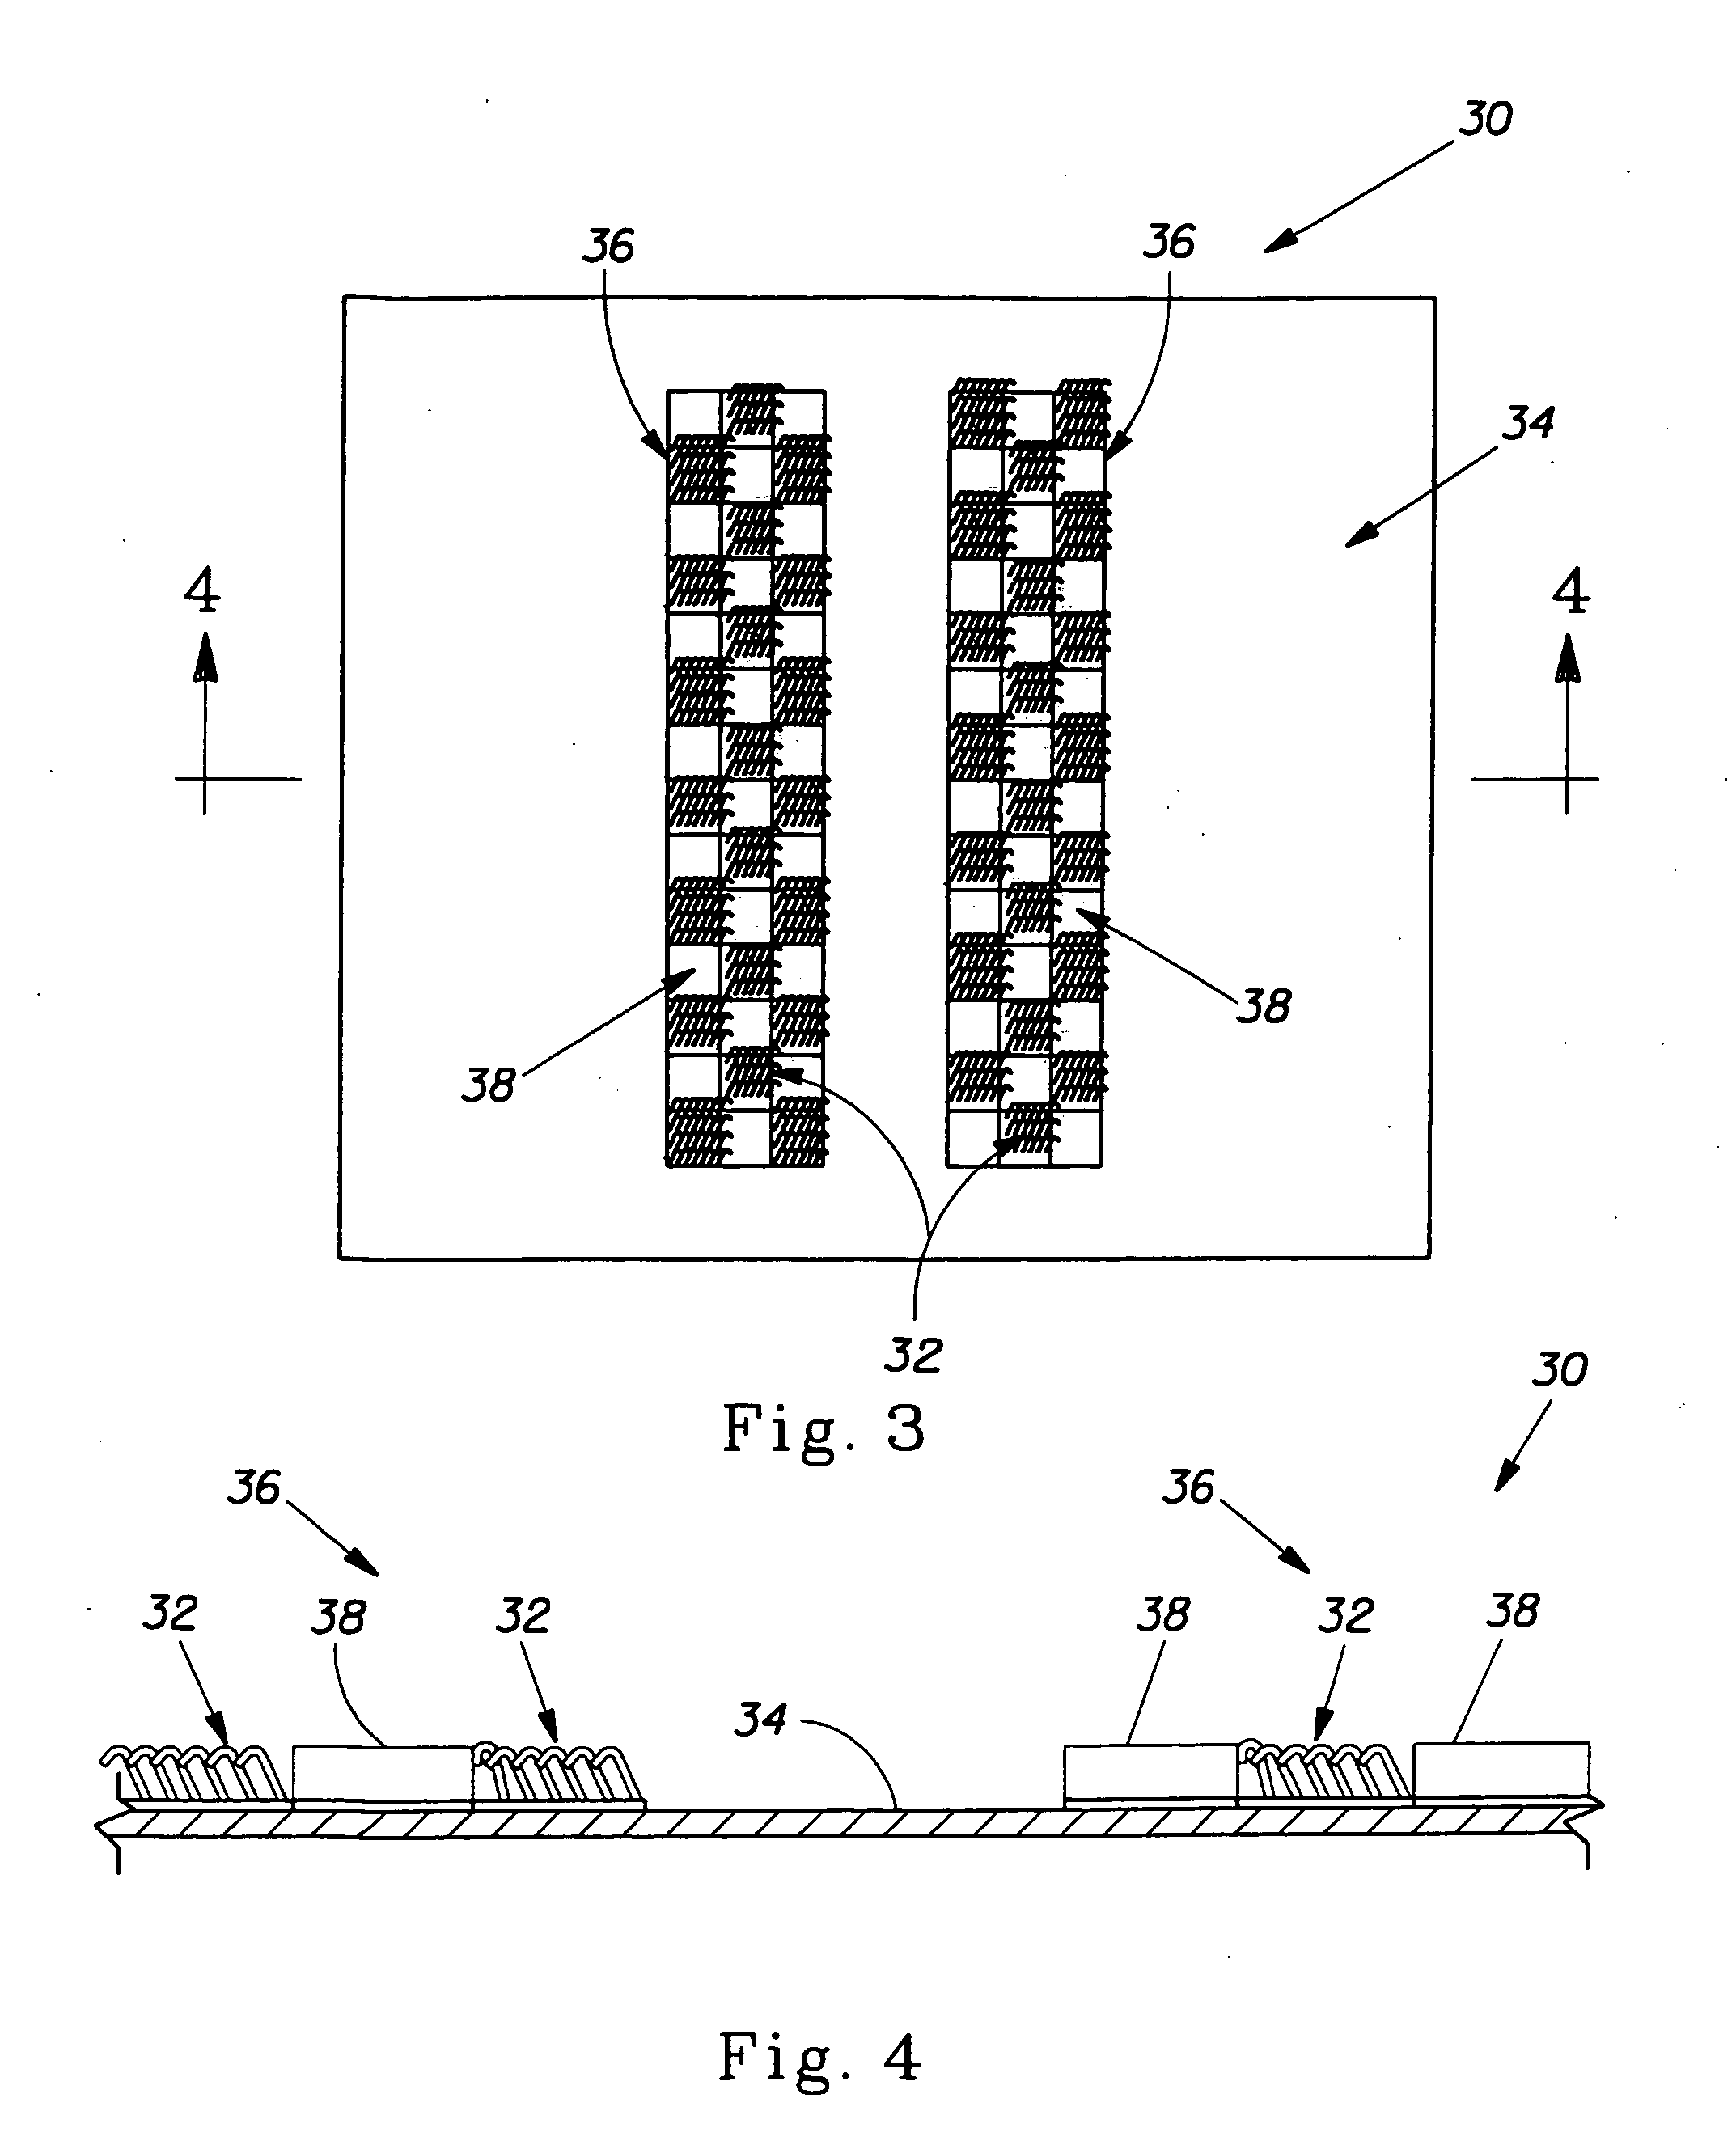 Disposable cleaning sheets comprising a plurality of protrusions for removing debris from surfaces